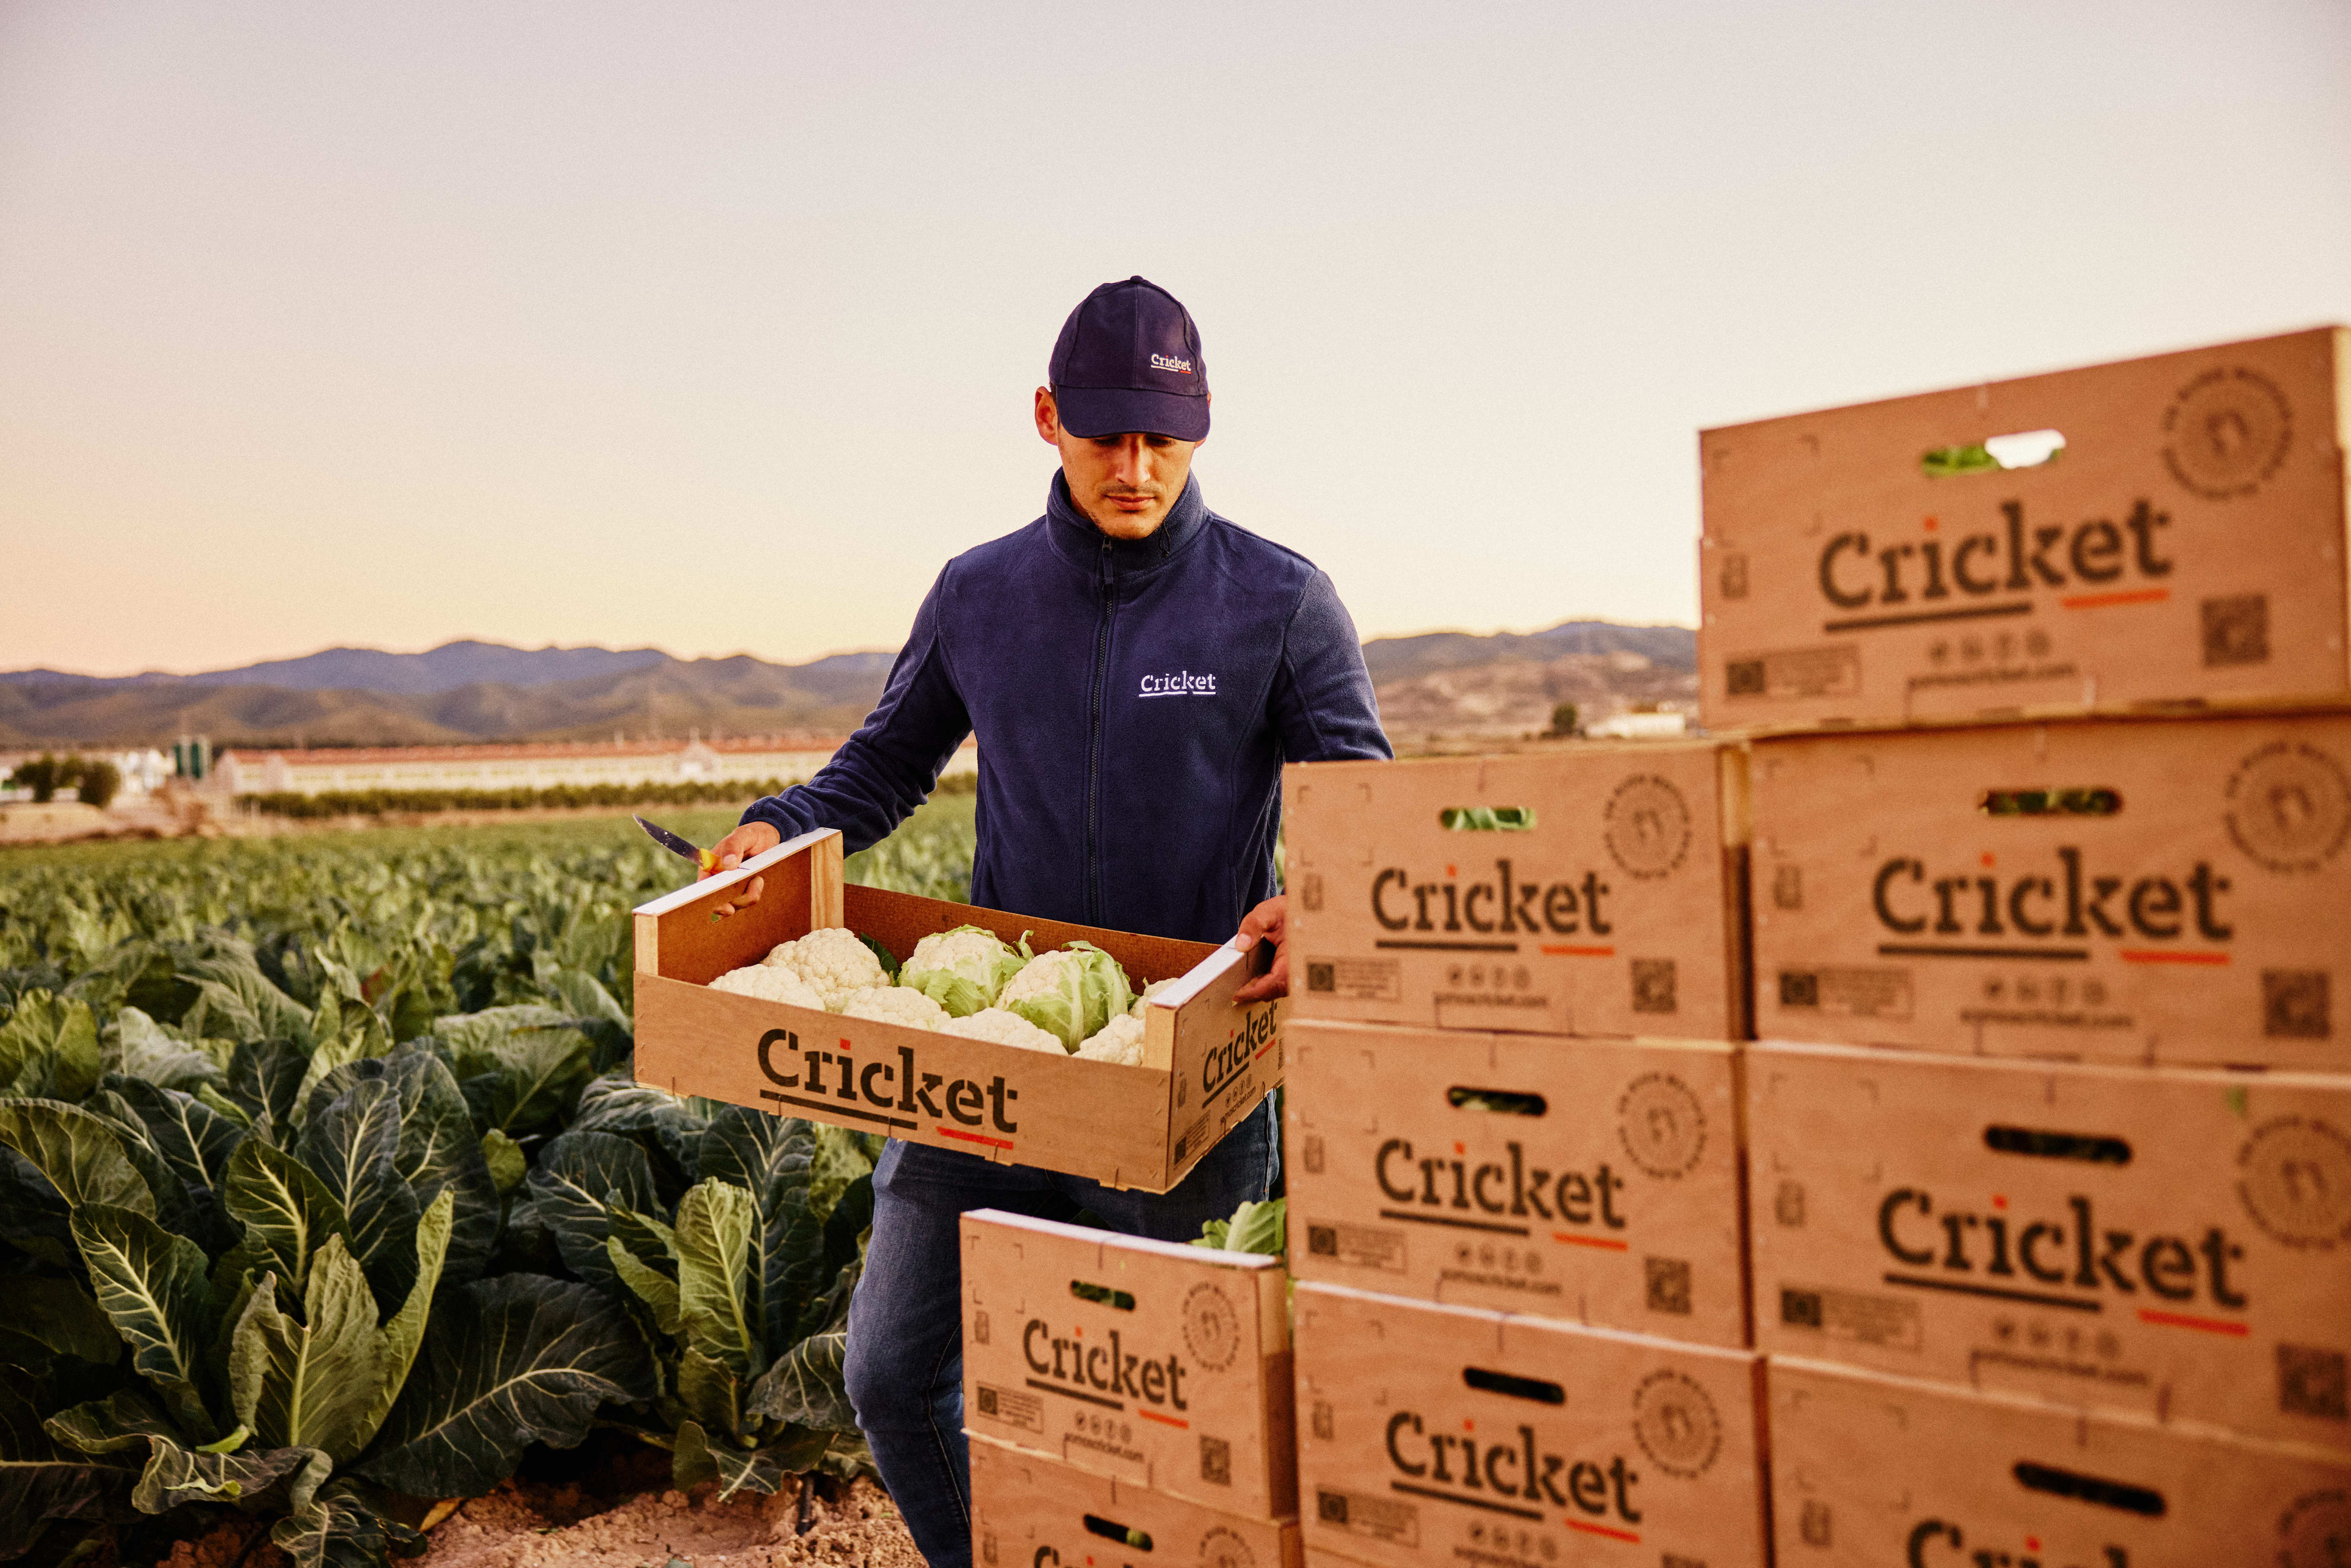 Cricket – a reliable brand for the future